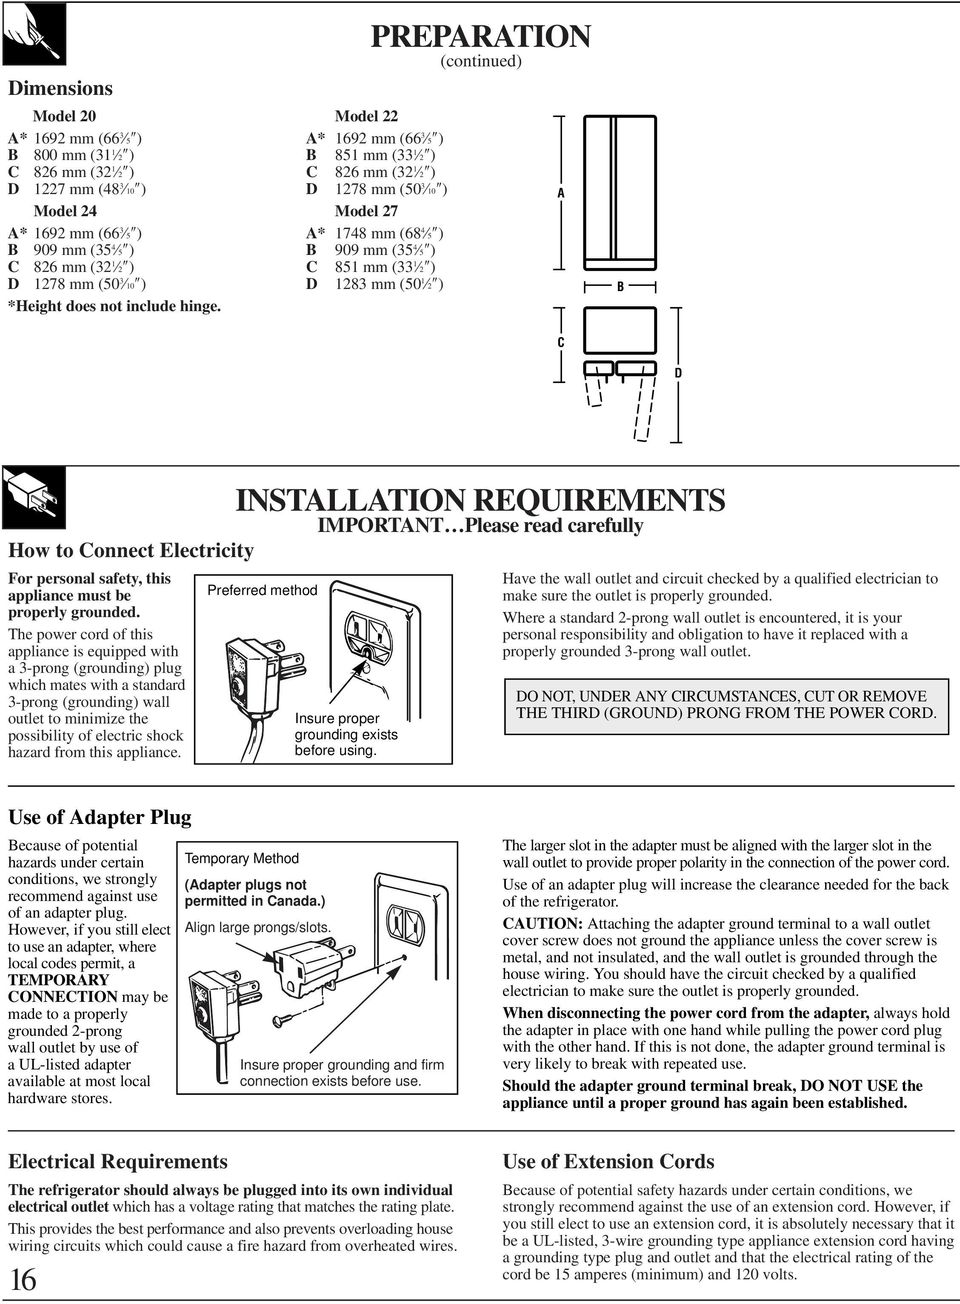 PREPARATION (continued) A B C D INSTALLATION REQUIREMENTS IMPORTANT Please read carefully How to Connect Electricity For personal safety, this appliance must be properly grounded.